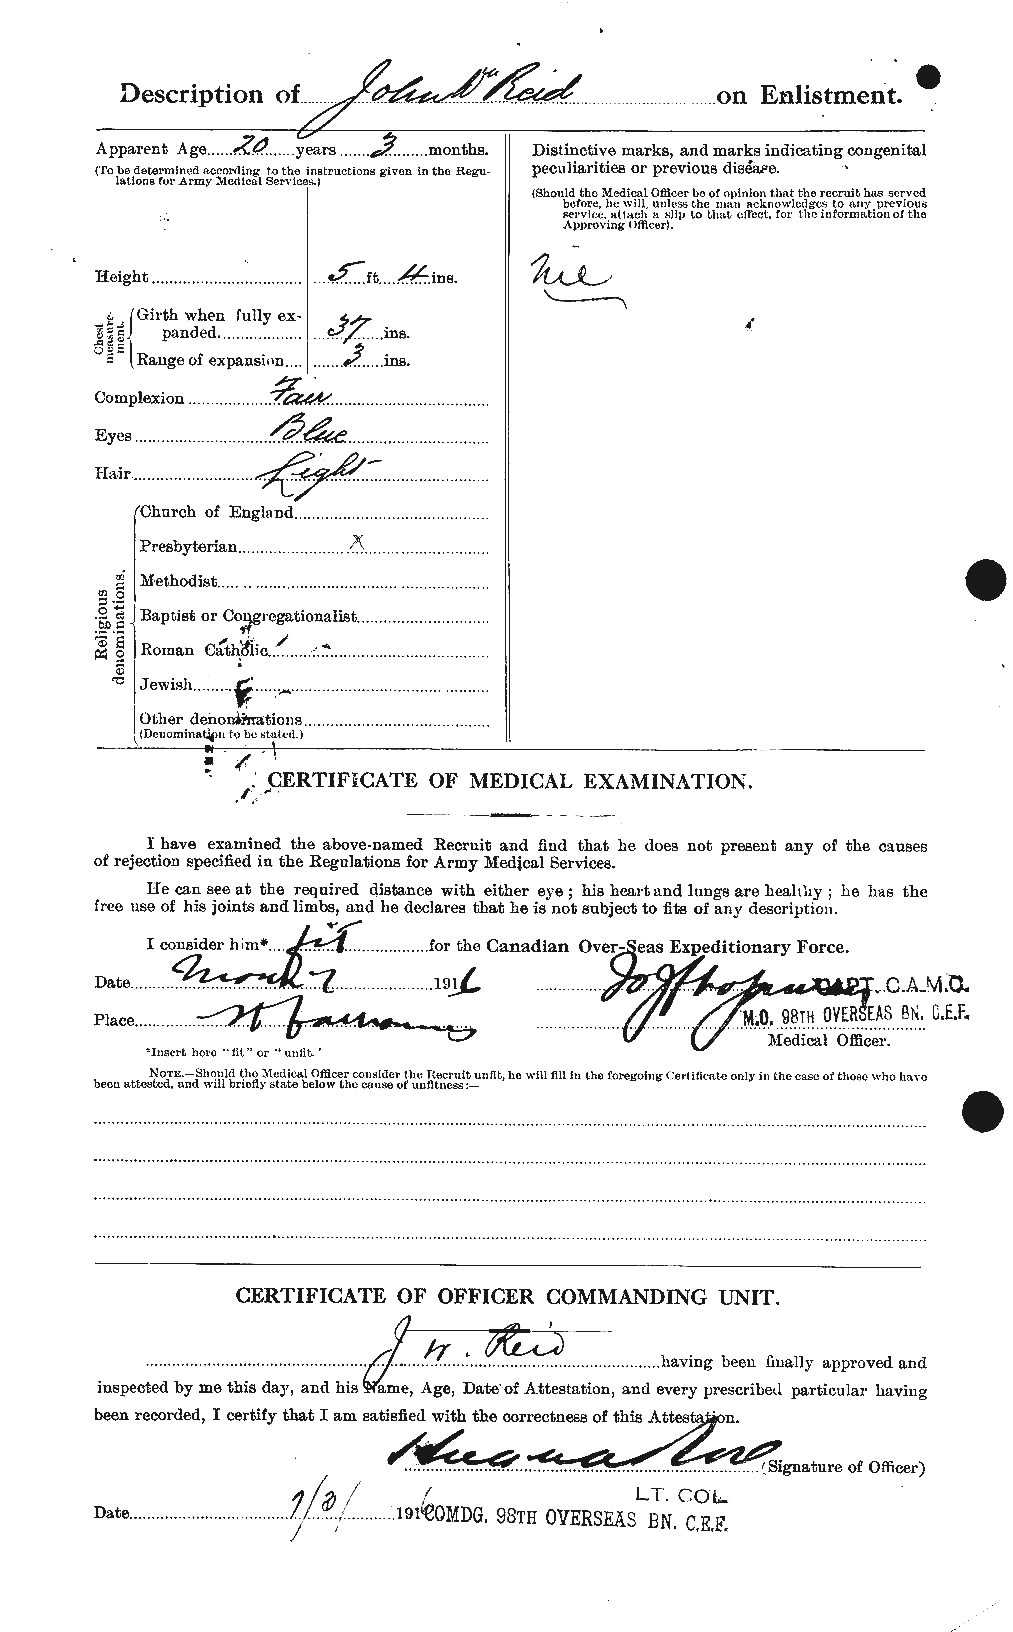 Personnel Records of the First World War - CEF 598882b